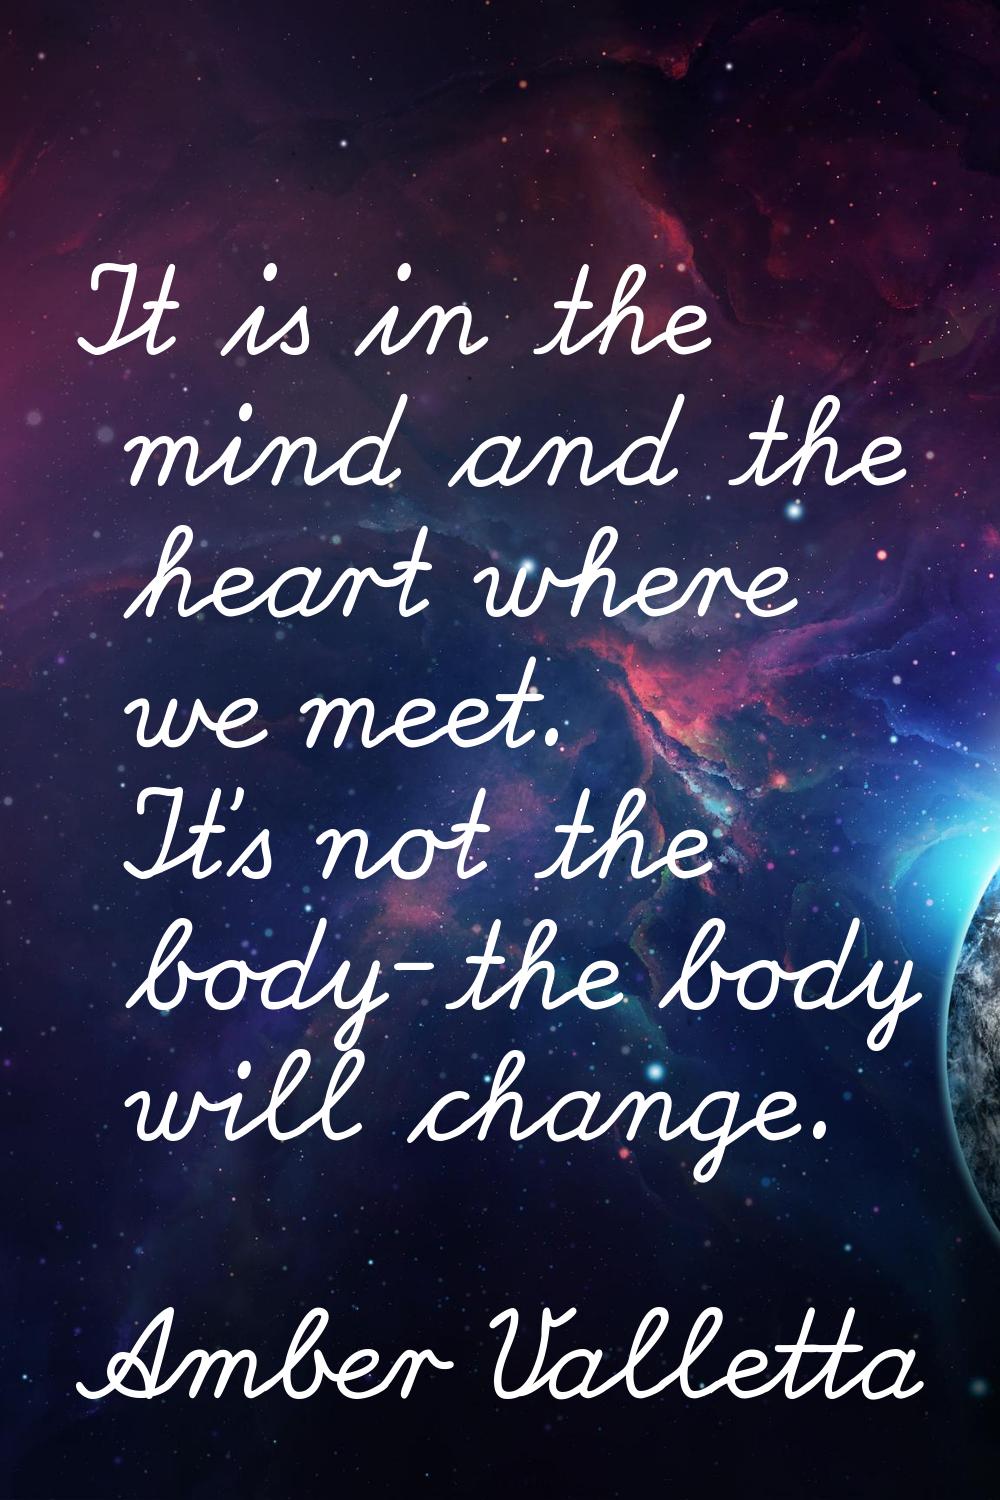 It is in the mind and the heart where we meet. It's not the body-the body will change.